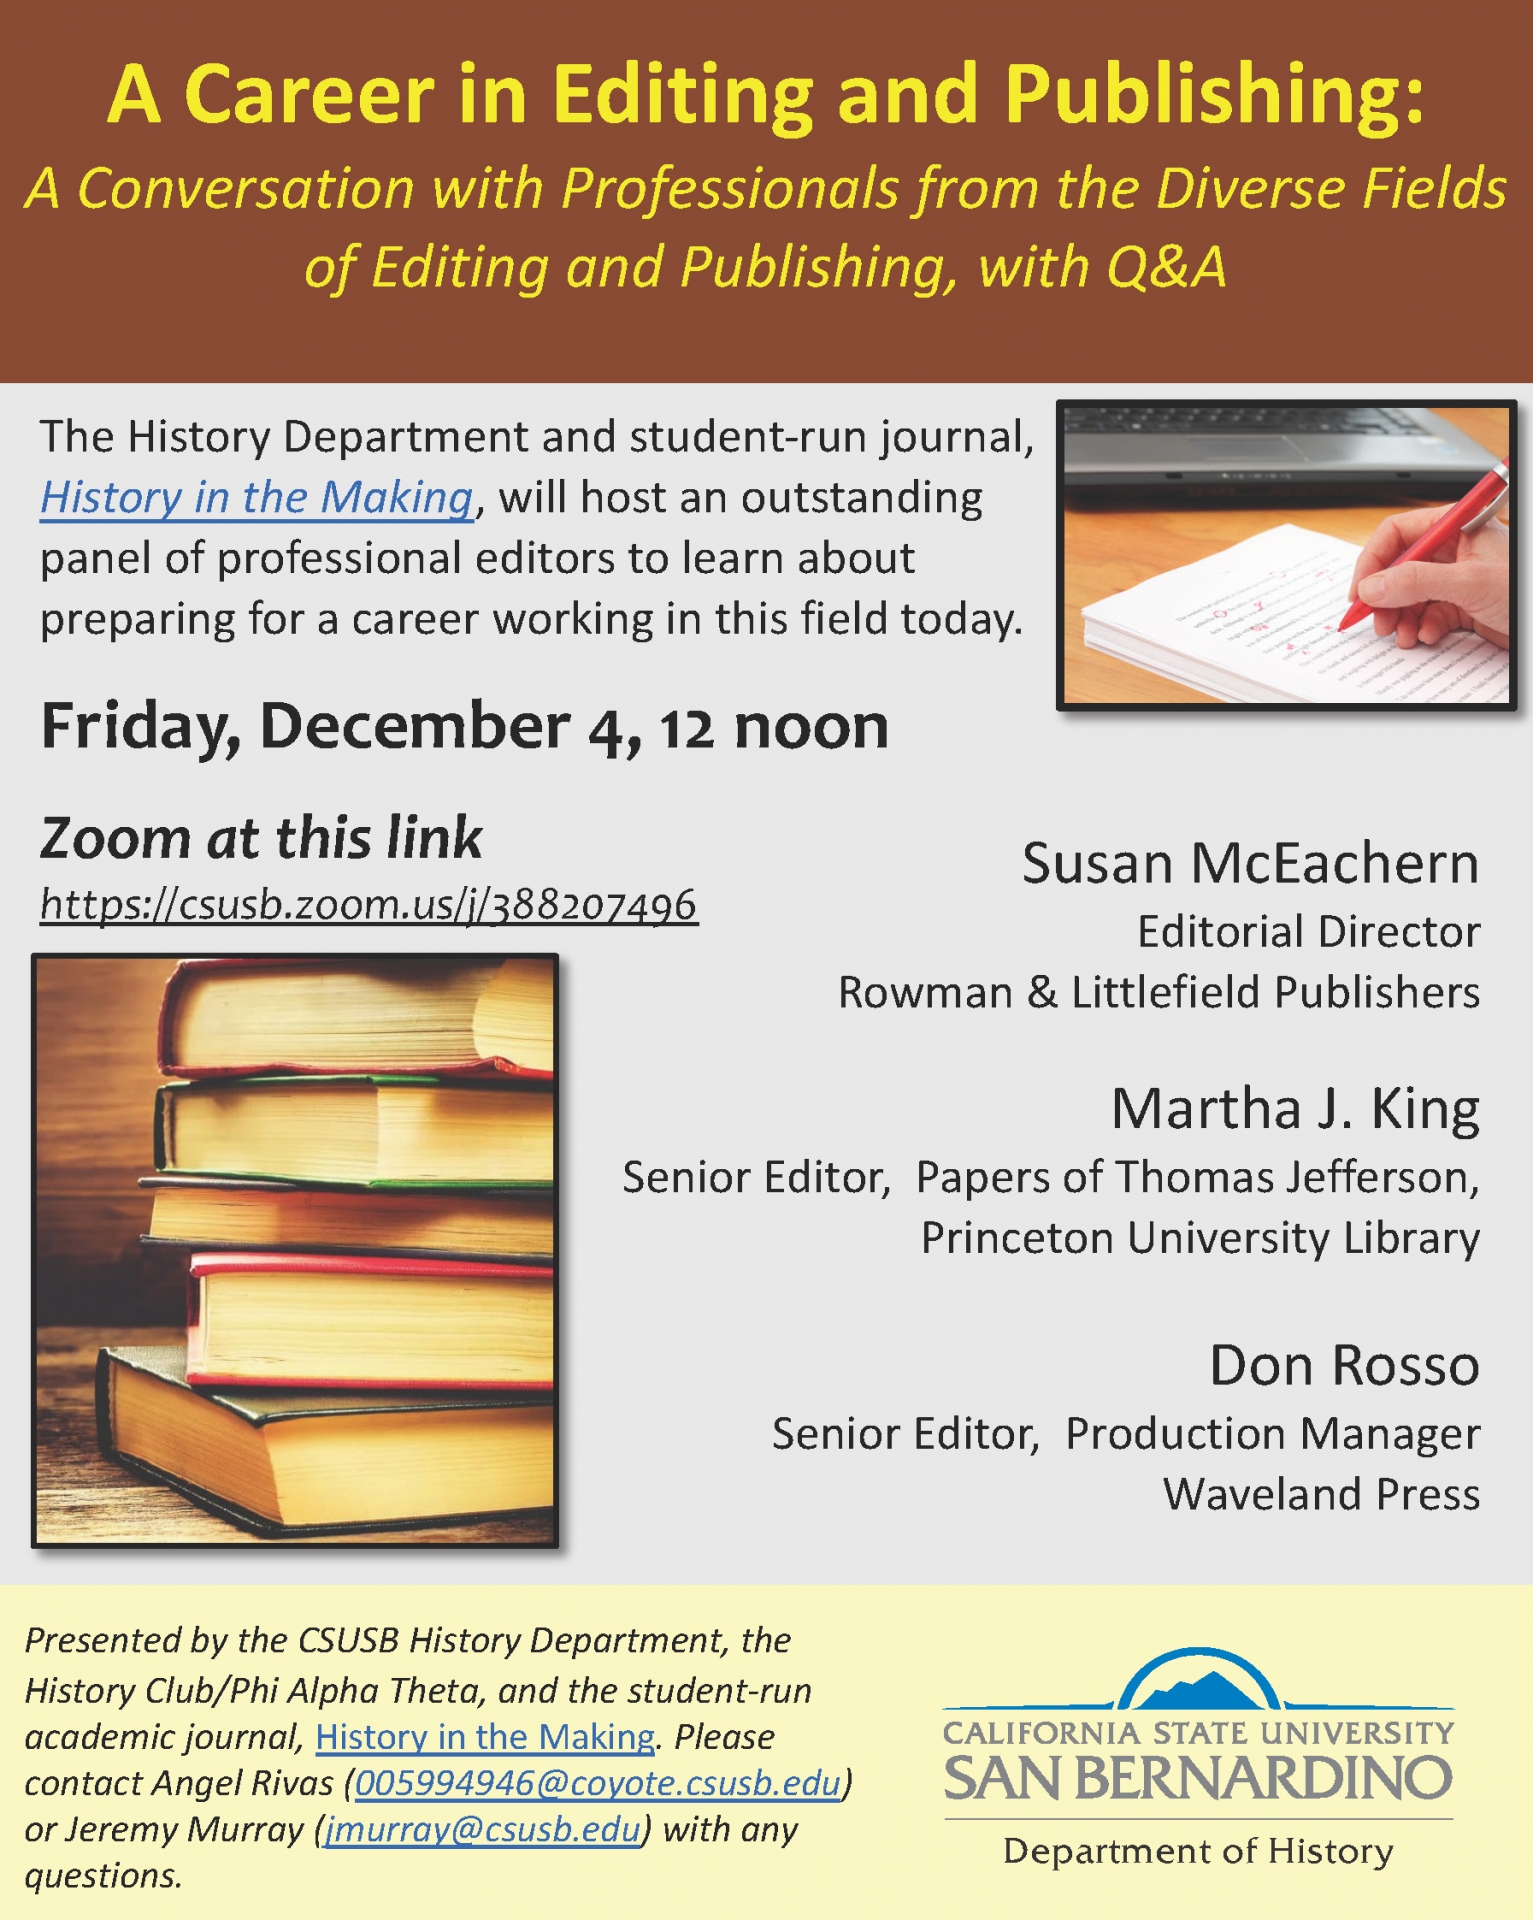 “A Career in Editing and Publishing: A Conversation with Professionals from the Diverse Fields of Editing and Publishing” flier